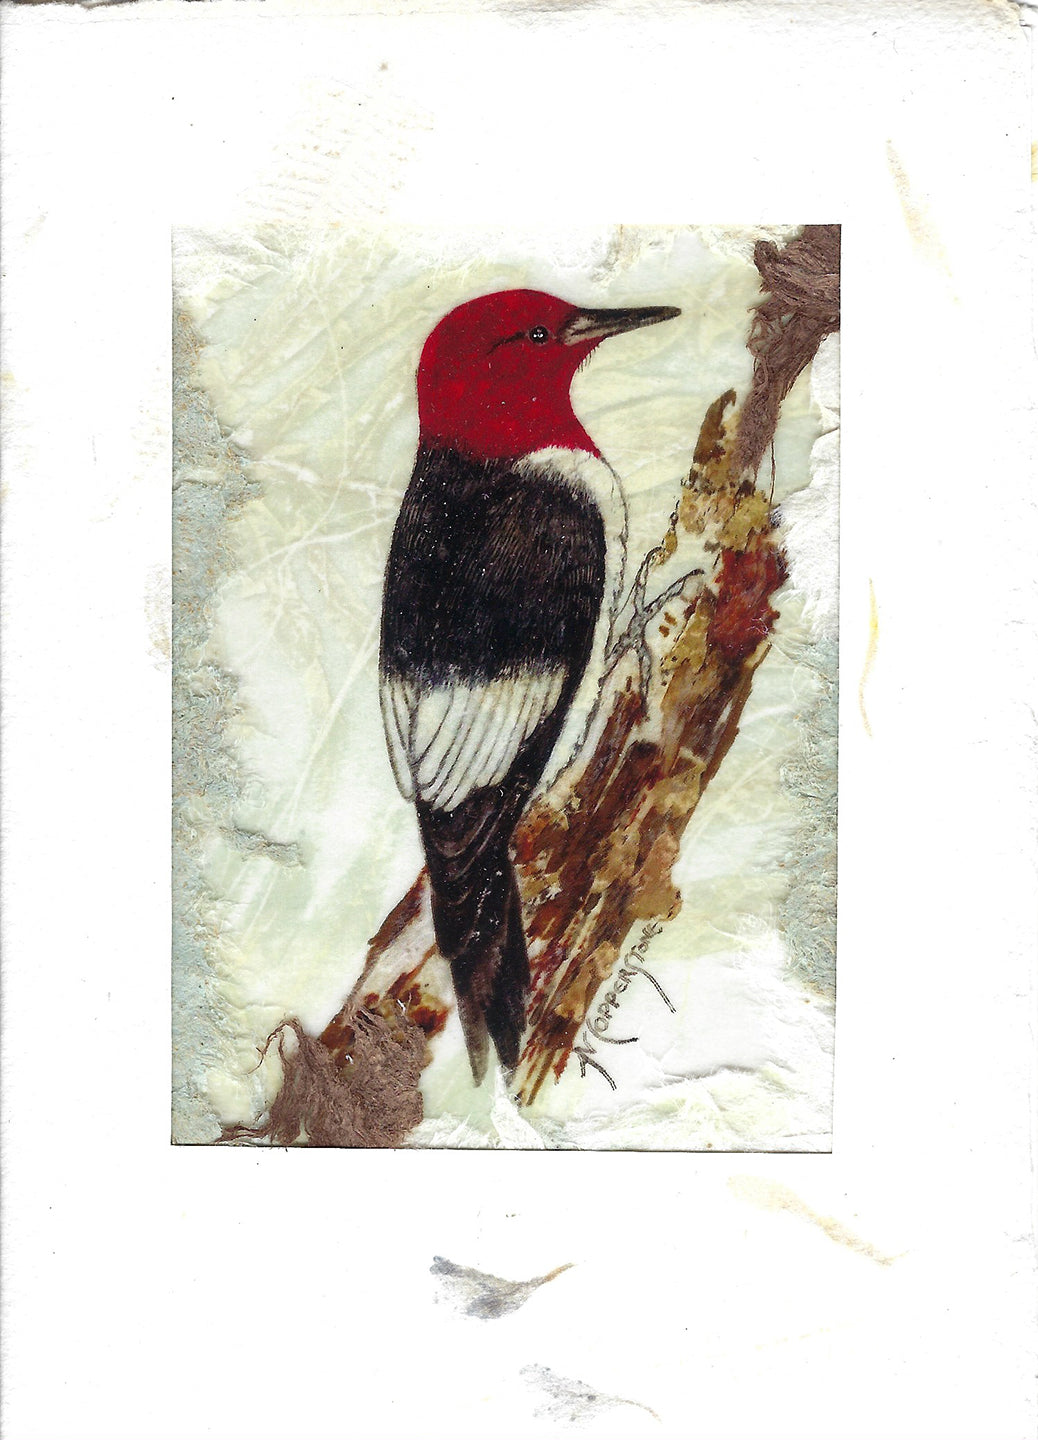 Woodpecker - Mixed media fine art print by Janice A. Copperstone of Milford, Mich. 